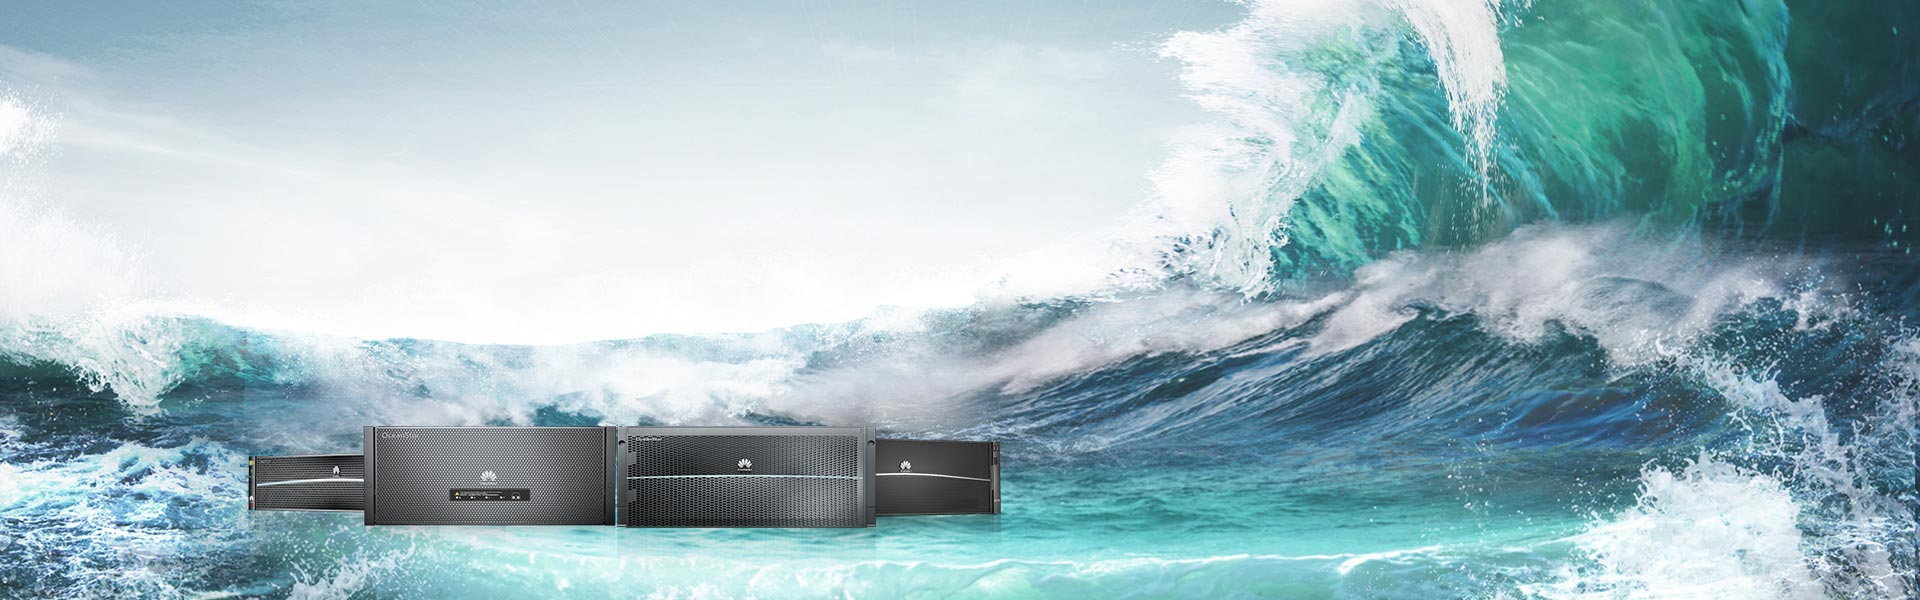 huawei-distributed-storage-banner-pc